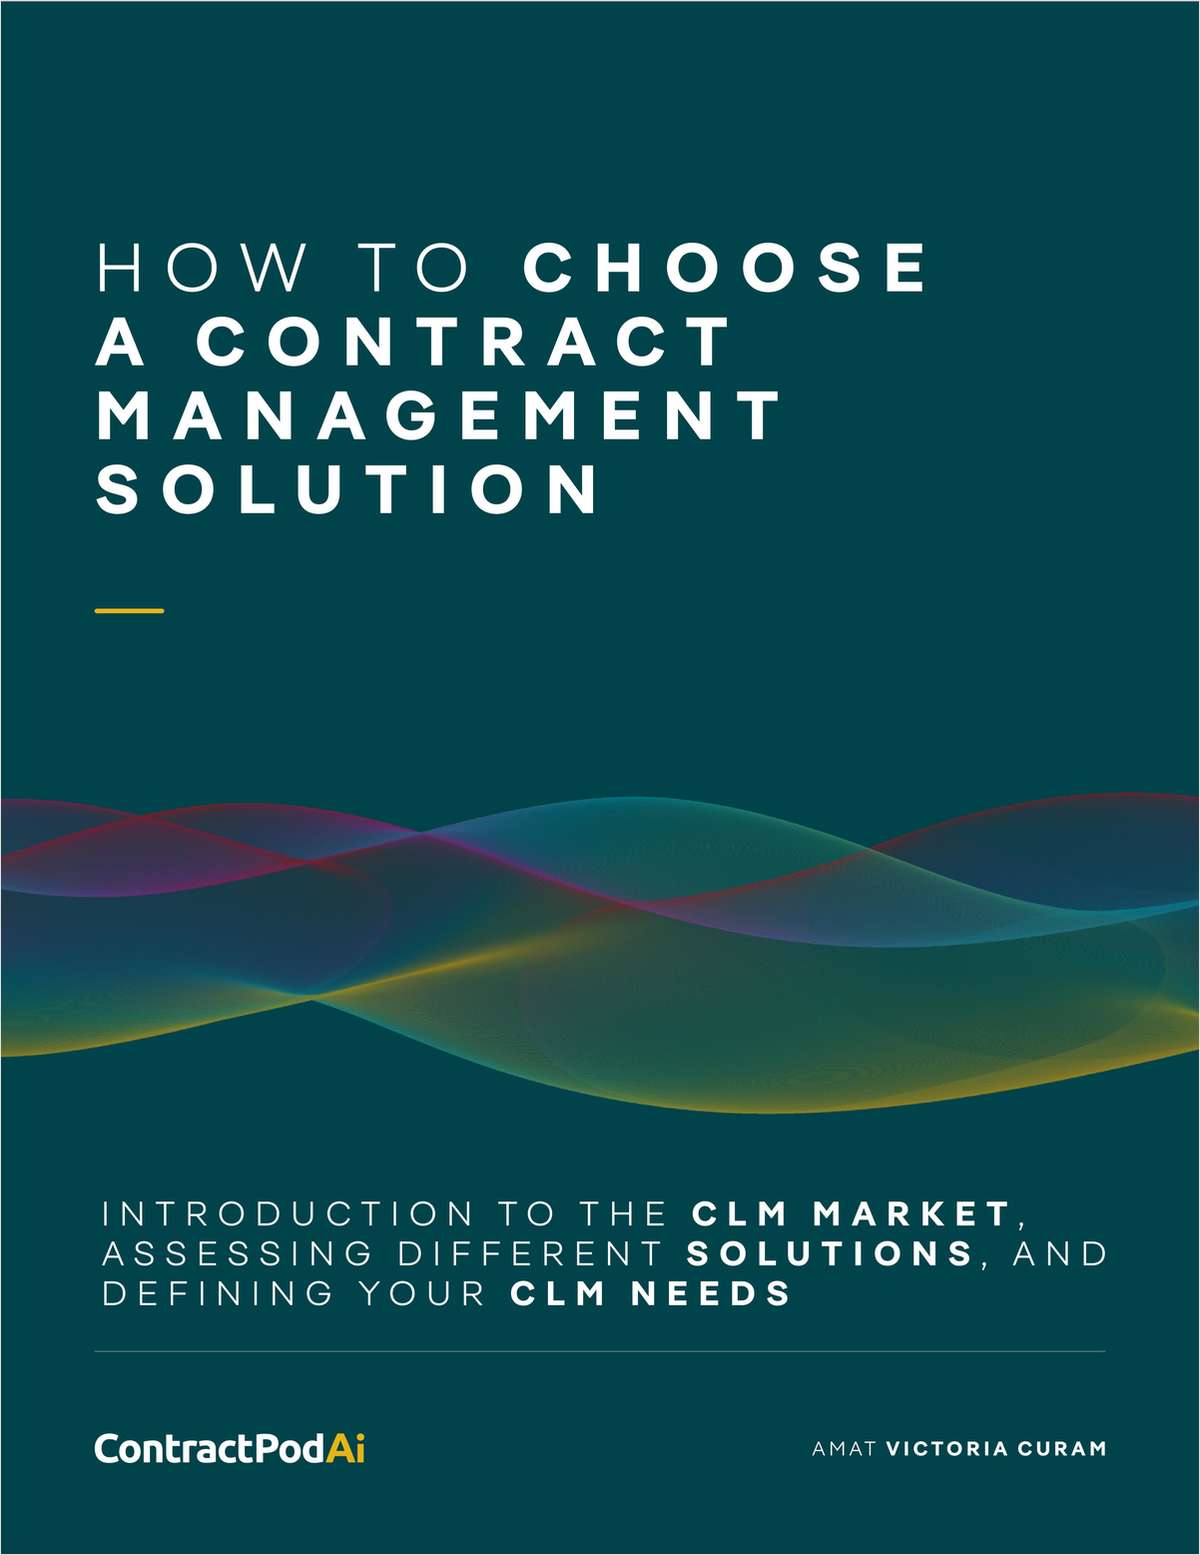 Download this guide to better understand the contract lifecycle management (CLM) market, assess different solutions and define your CLM needs.